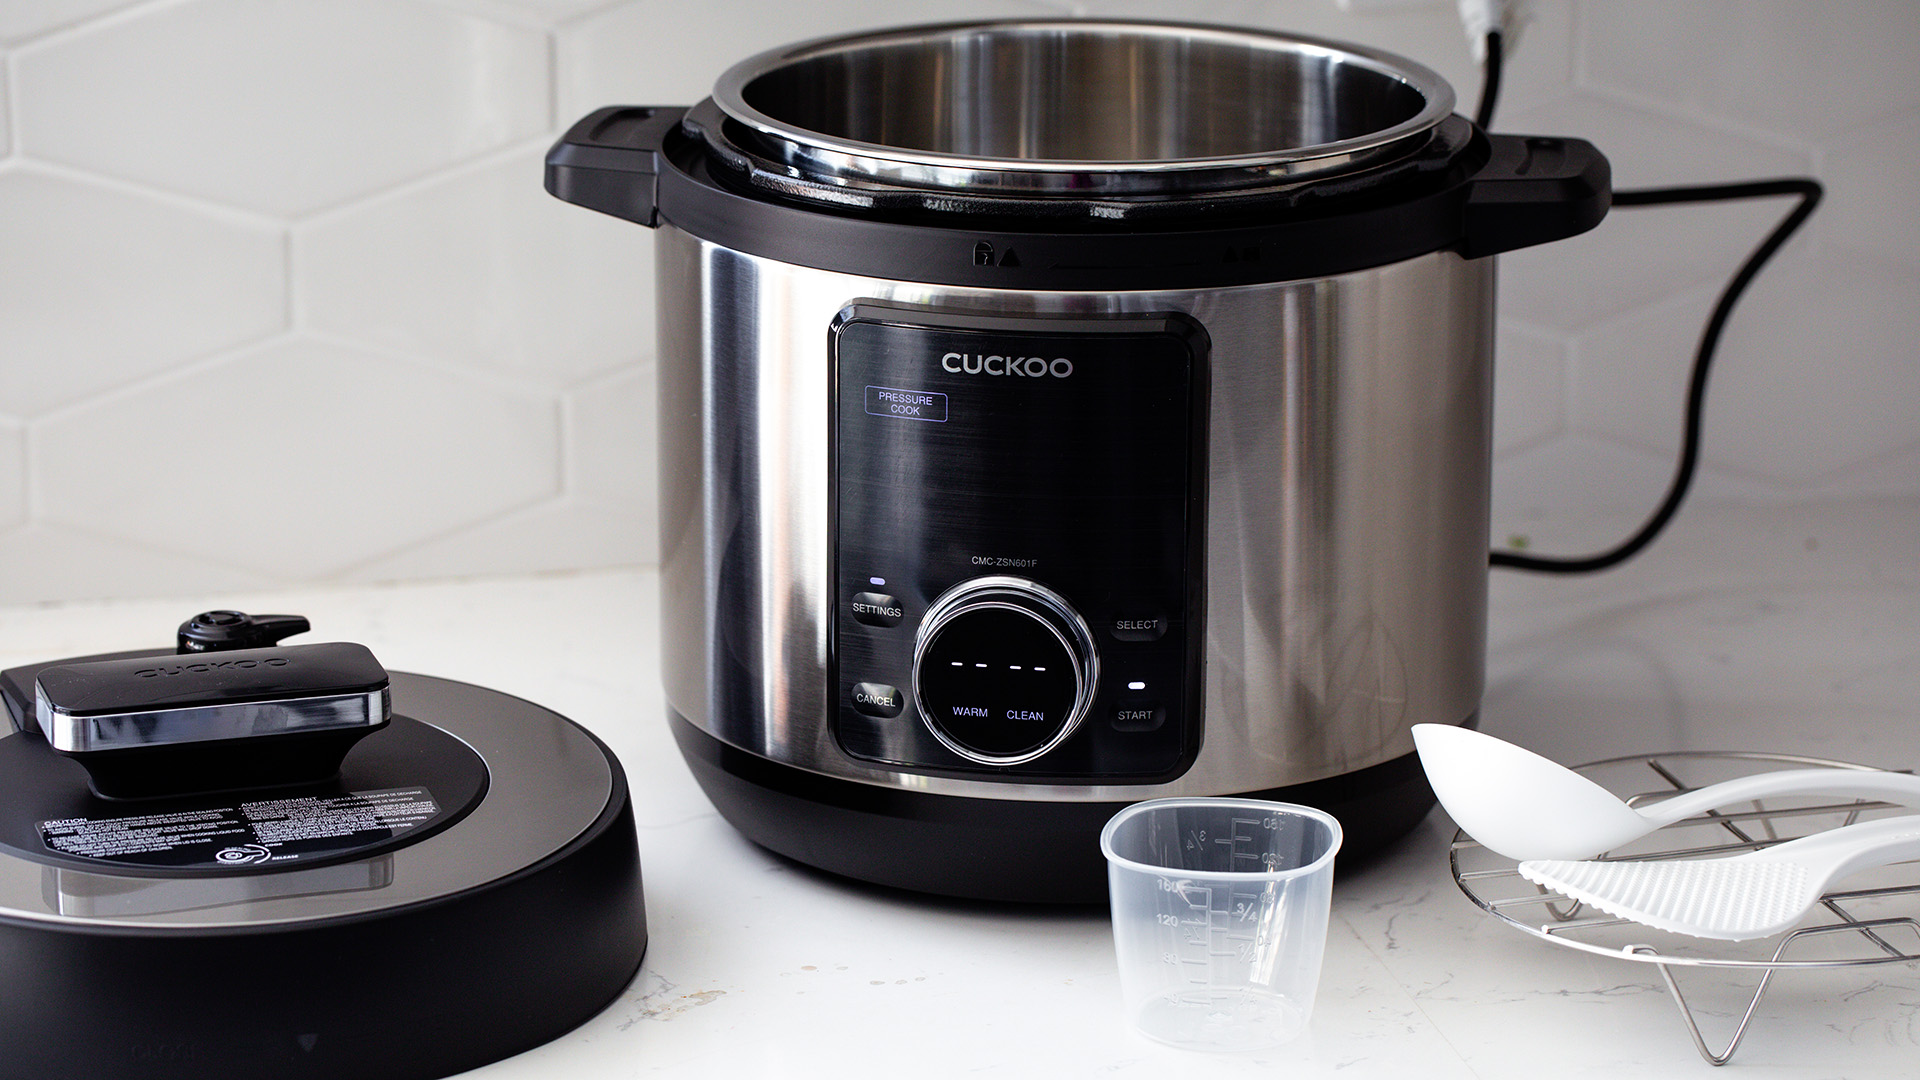 Tefal all-in-one pressure cooker review